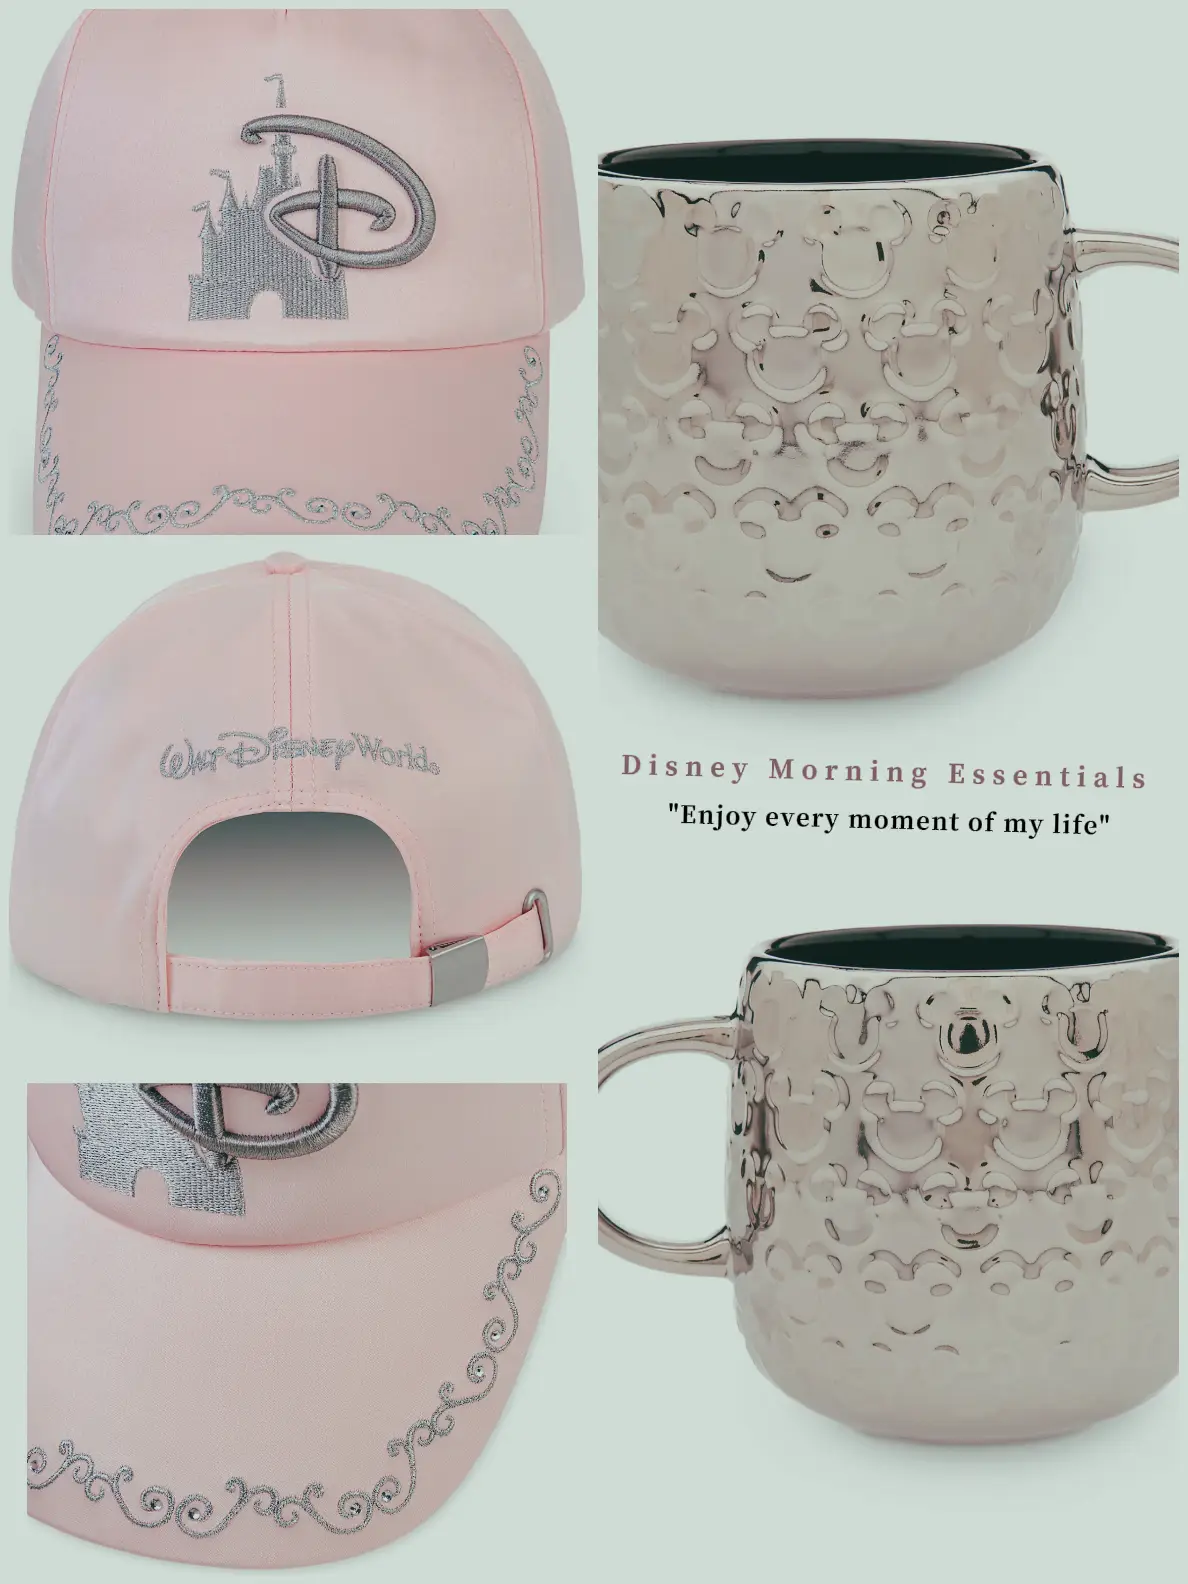 Have you seen the new Disney hat and Platinum mug?'s images